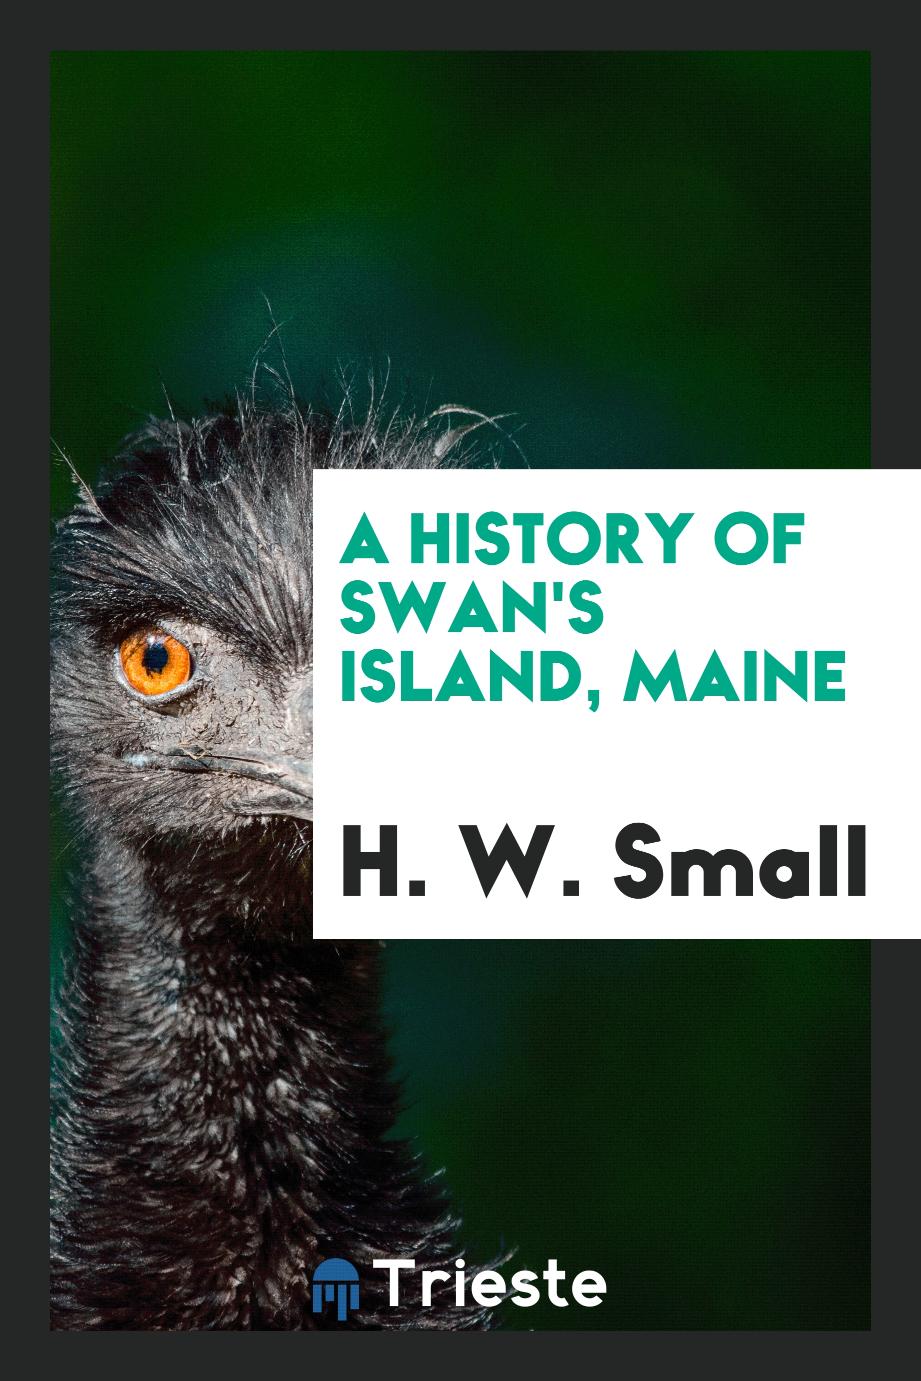 A History of Swan's Island, Maine